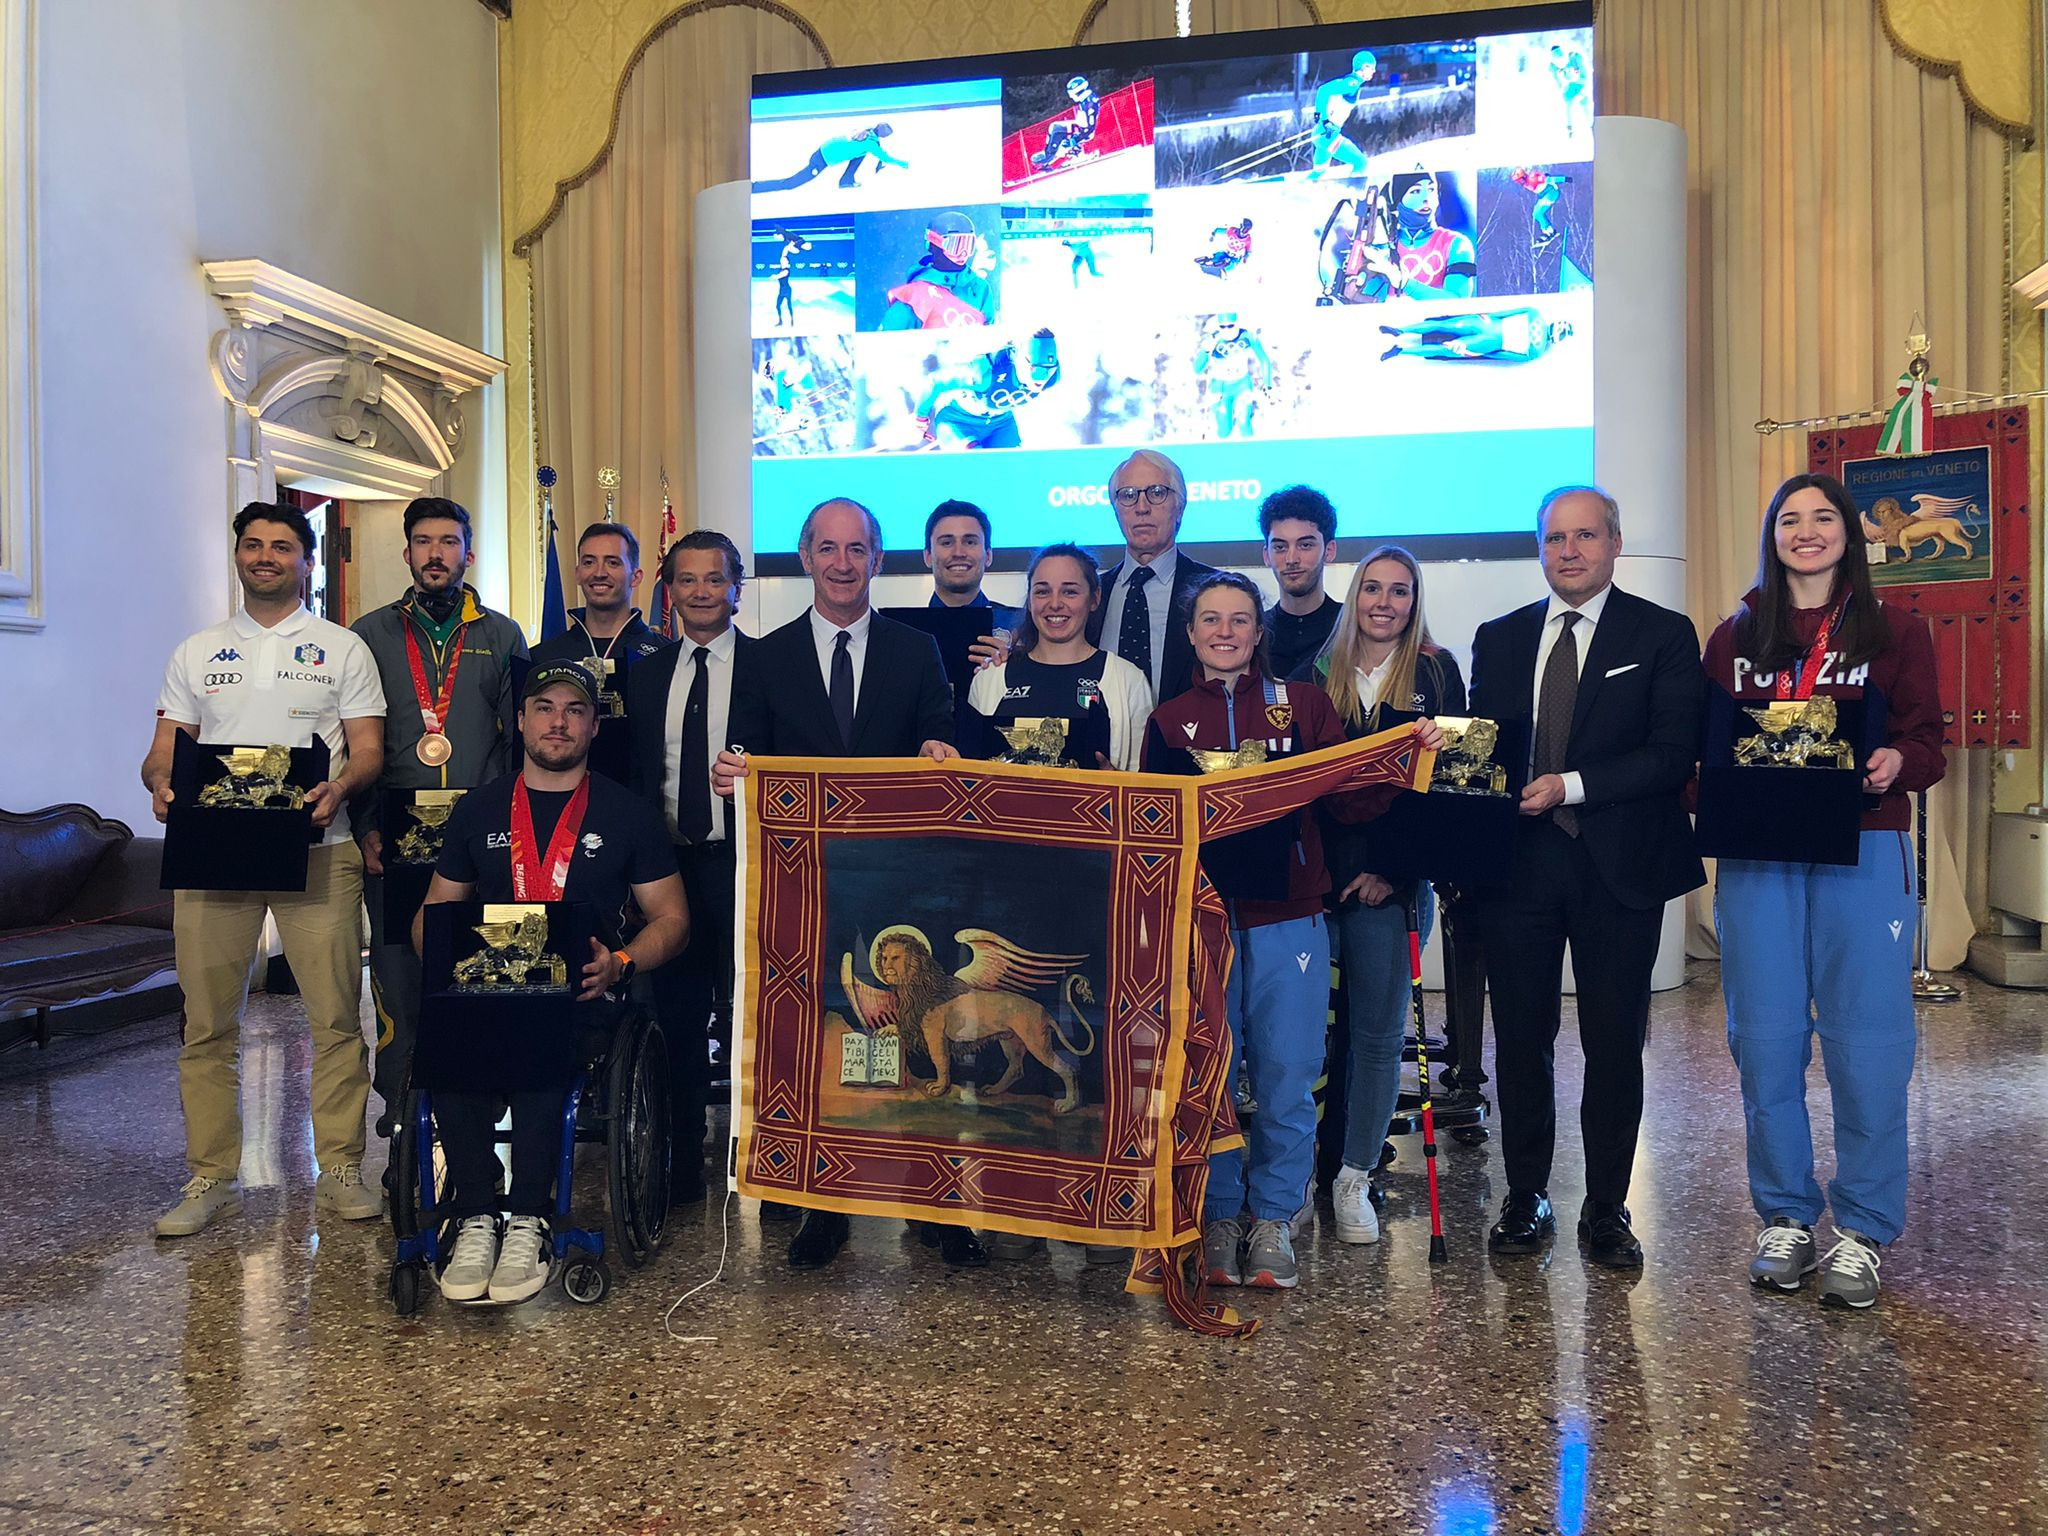 Veneto Governor hosts region's Olympians and Paralympians as focus turns to 2026